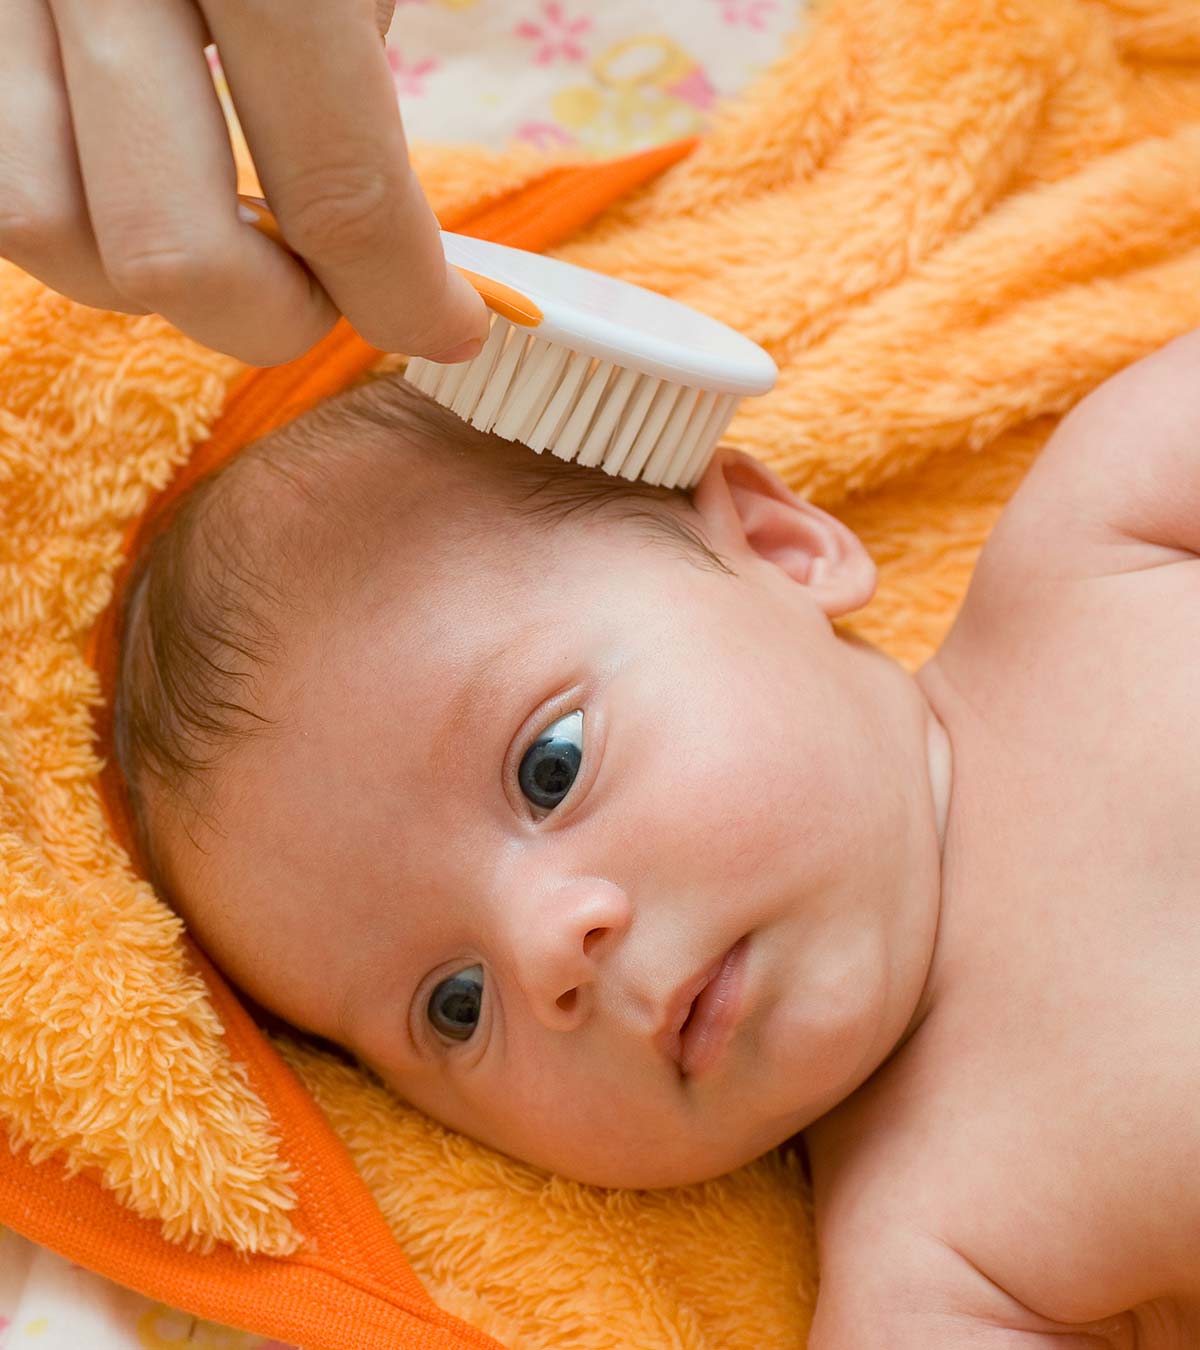 Dandruff In Babies: Causes, Symptoms, Treatment And Home Remedies